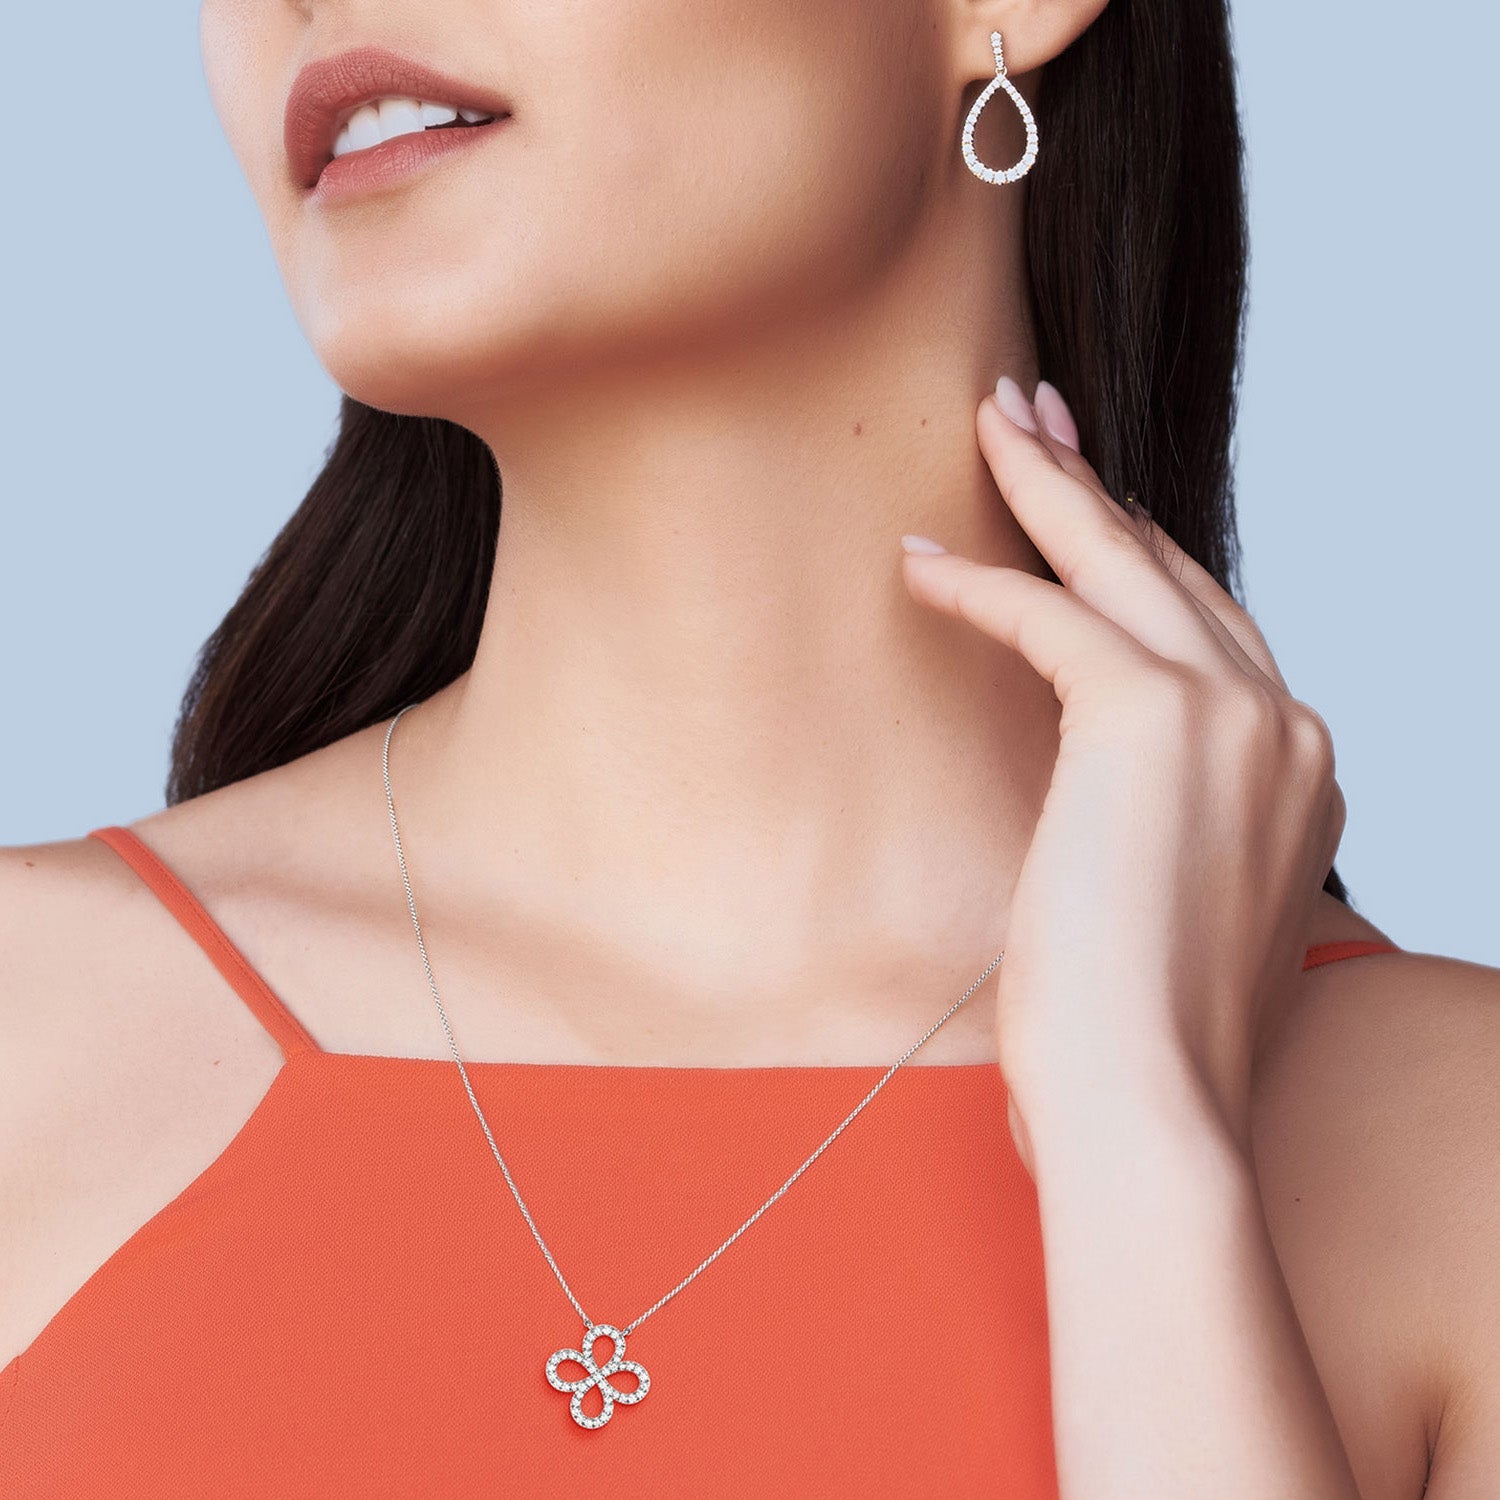 Infinity-Clover Silhouette Necklace_Product Angle_Lifestyle Image